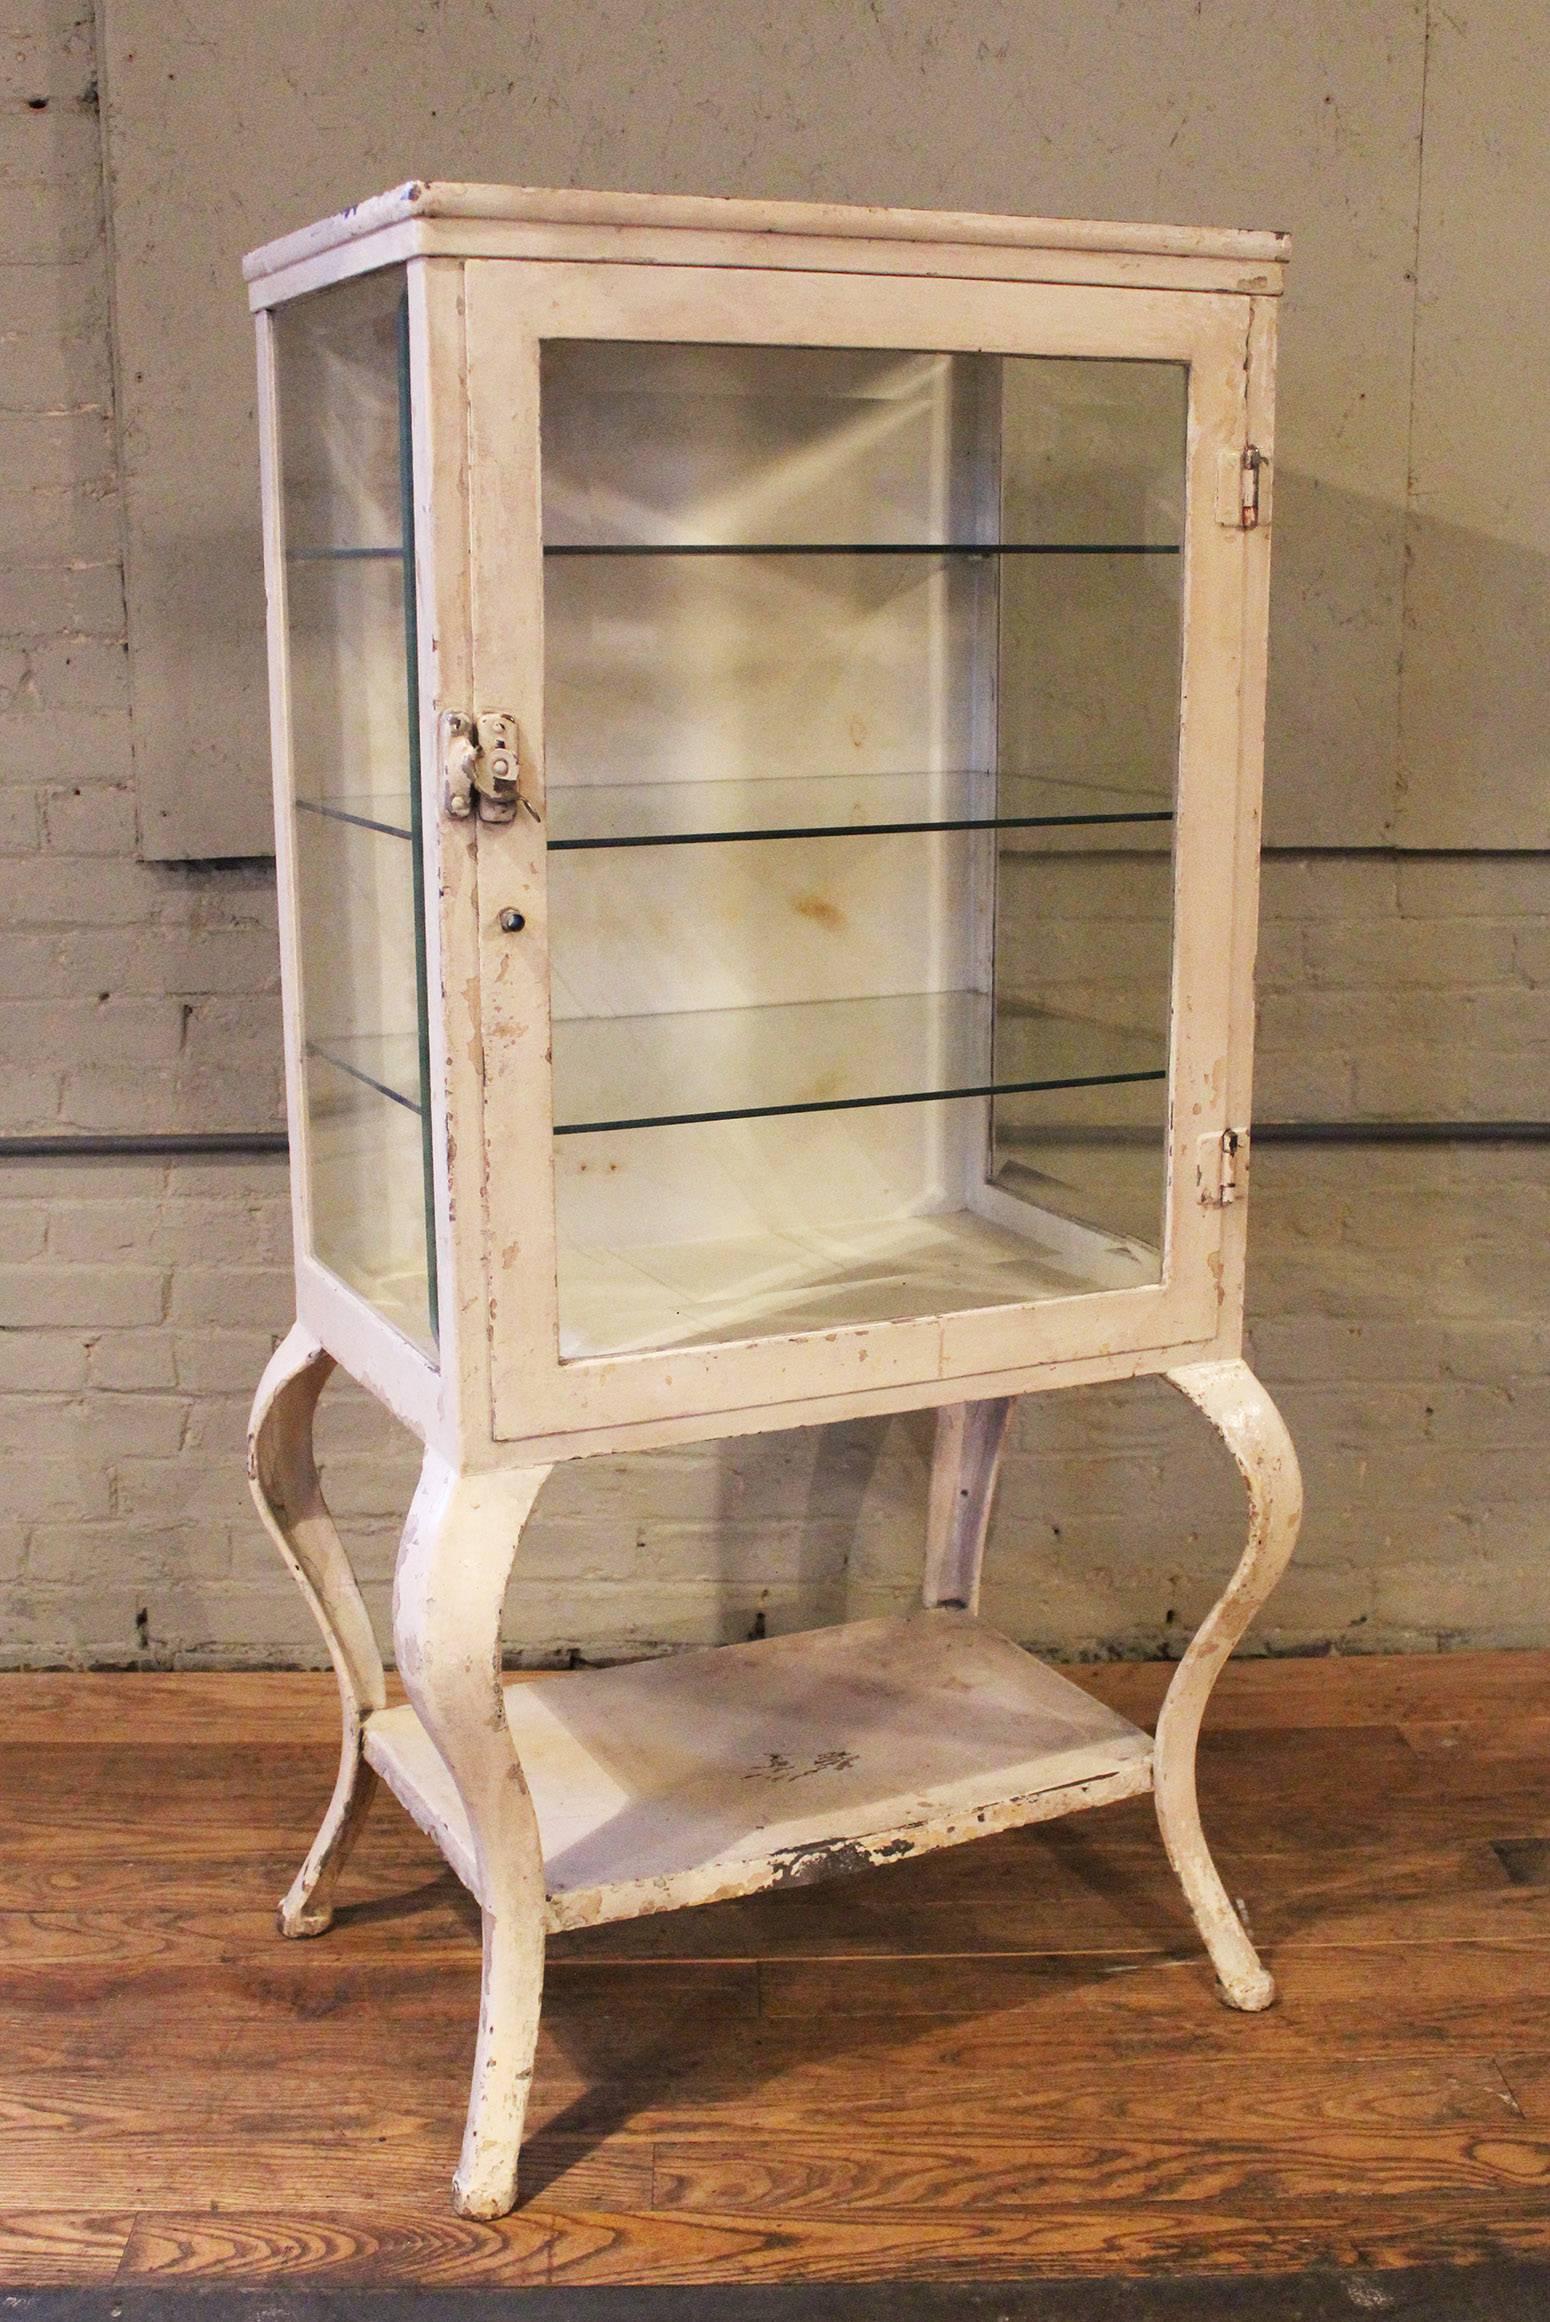 20th Century Medical Cabinet Antique Metal and Glass Apothecary, Vintage Industrial Storage